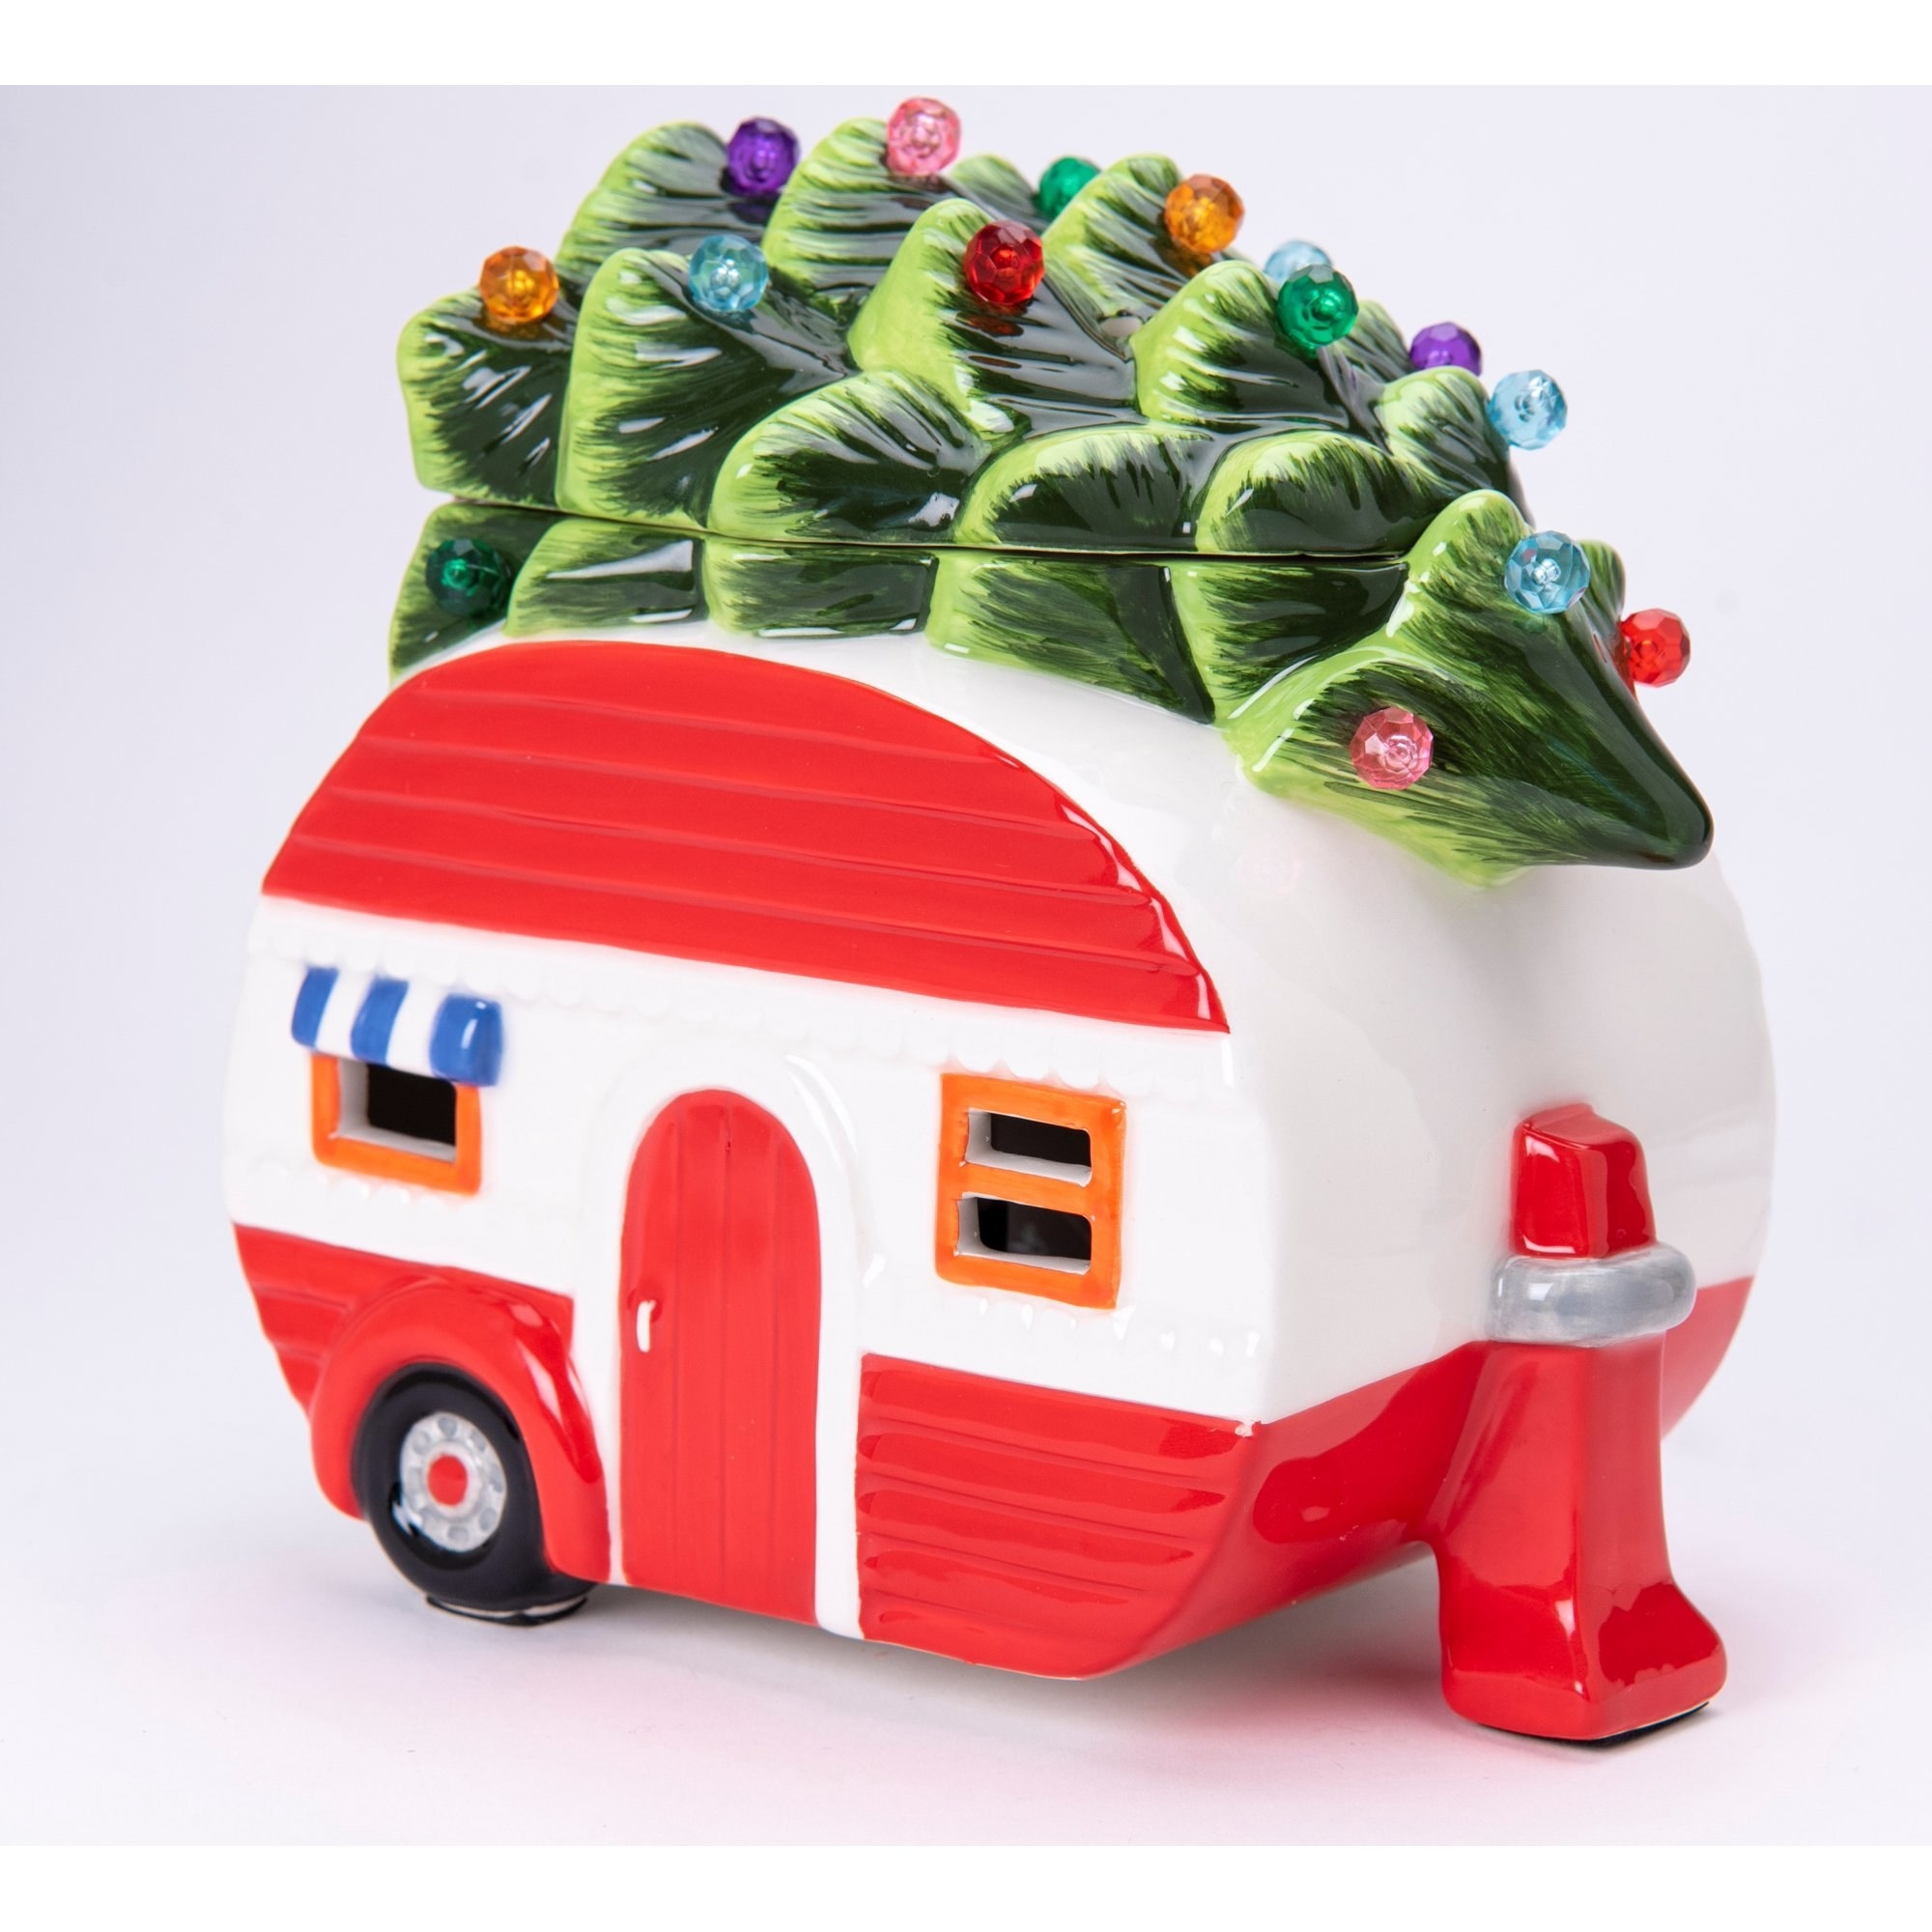 A ceramic wax warmer designed to look like a vintage RV camper with a Christmas tree tied to its roof